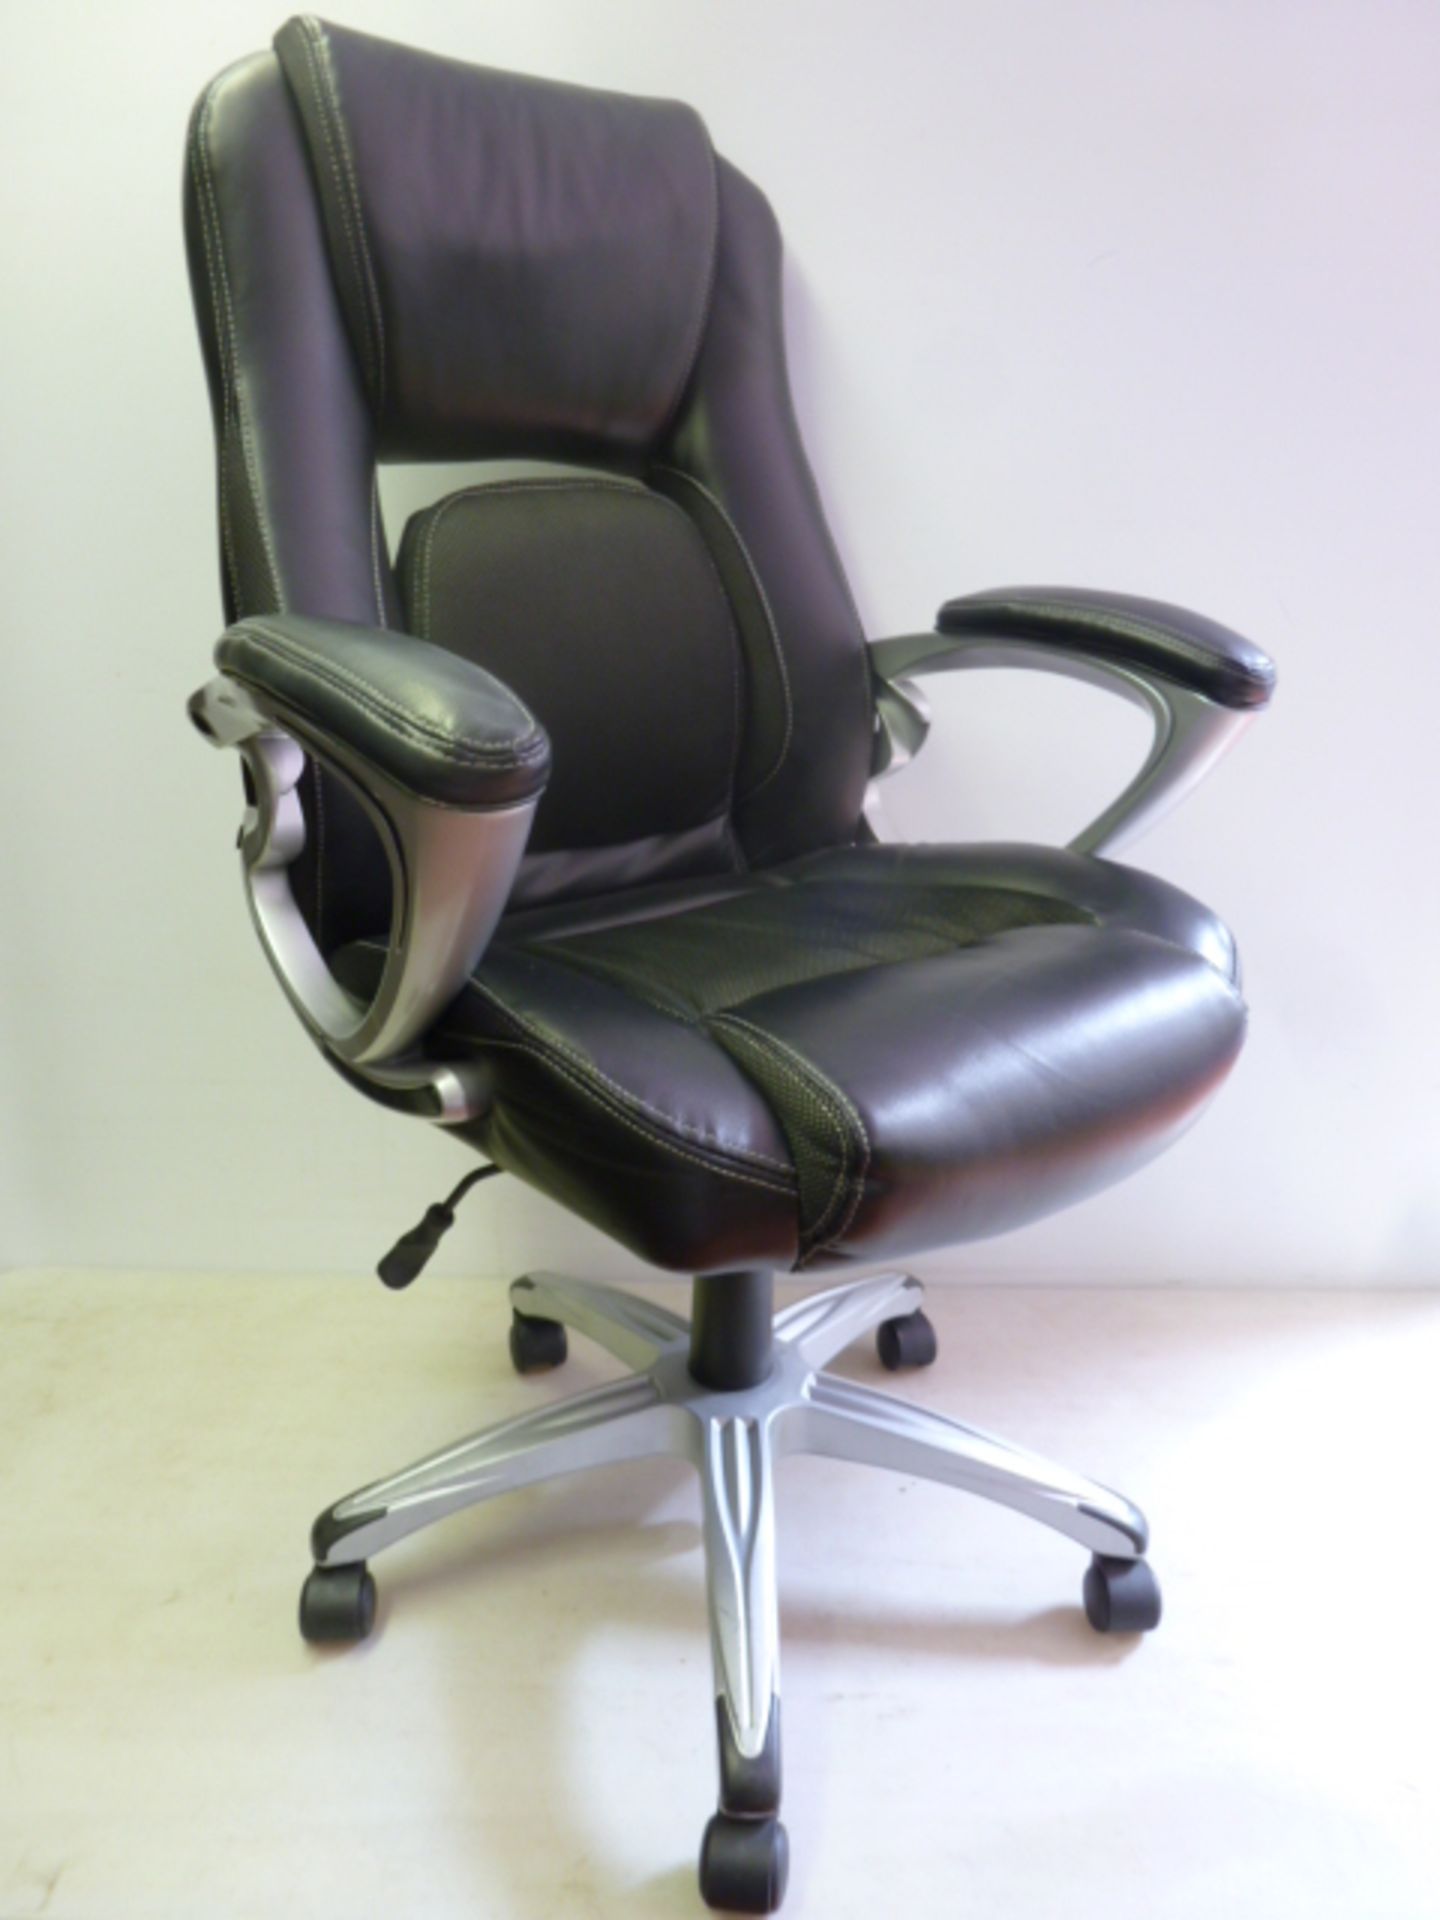 Costco Executive Office Chair. Model 46468.